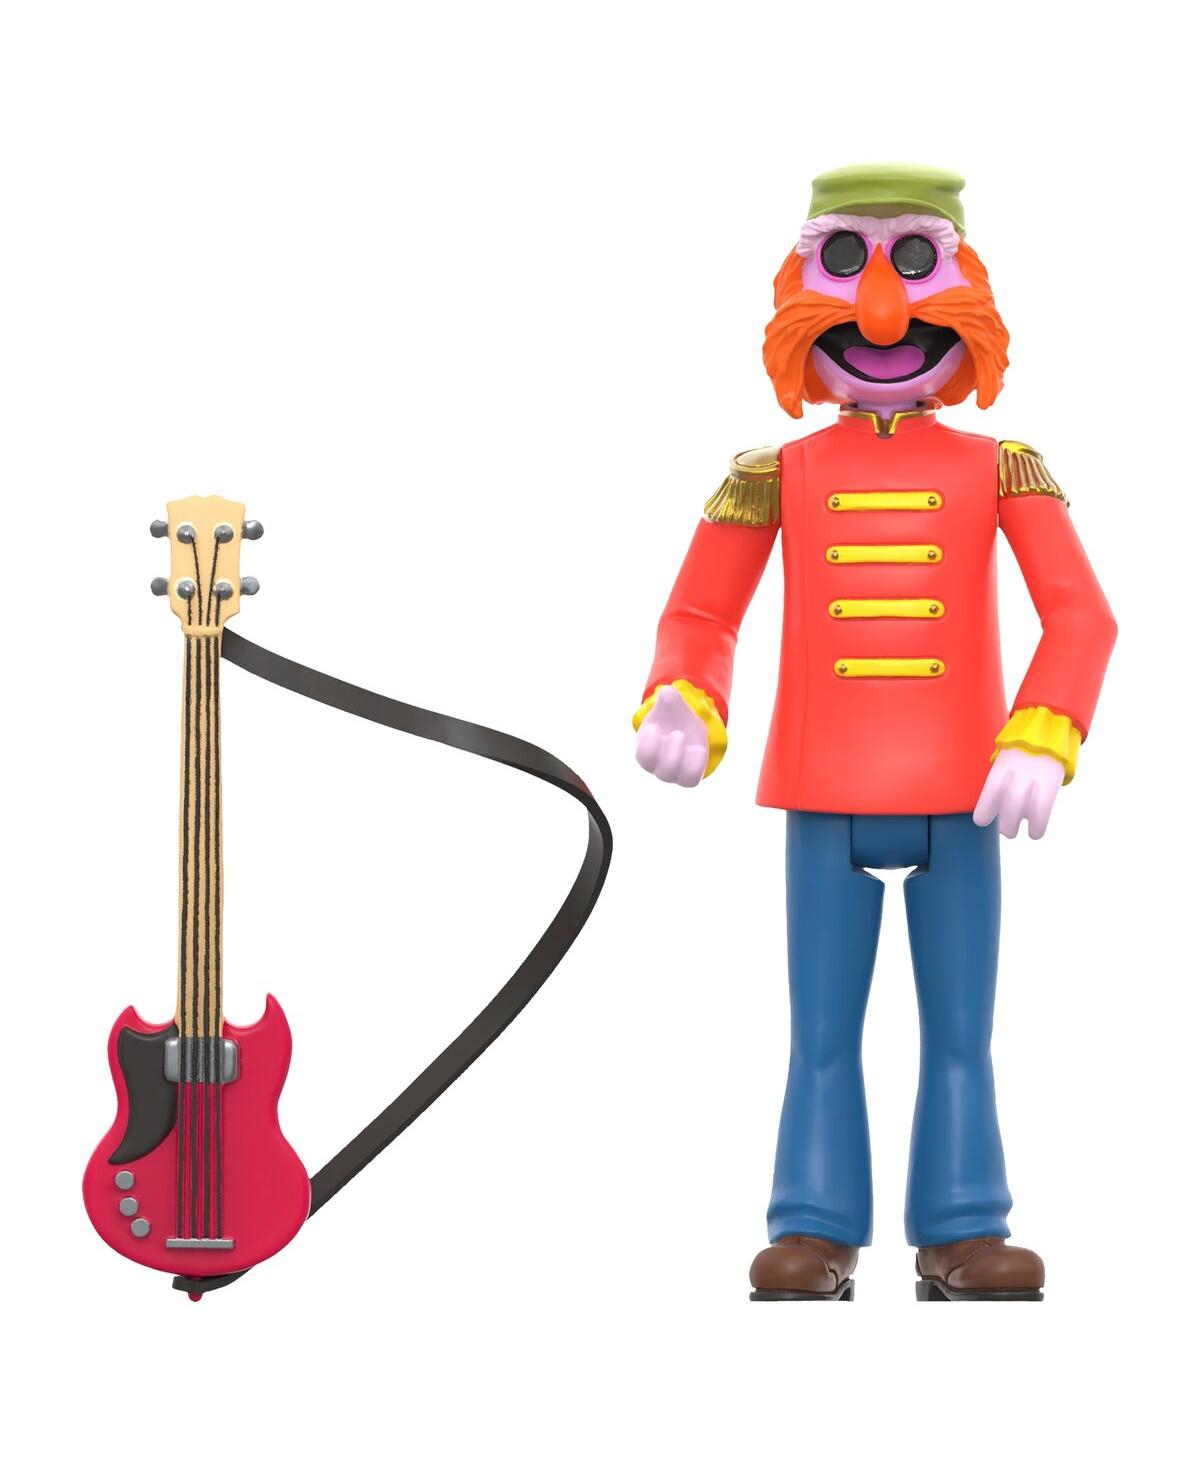 Shop Super 7 Dr. Teeth & The Electric Mayhem Floyd The Muppets Reaction Figure In Multi